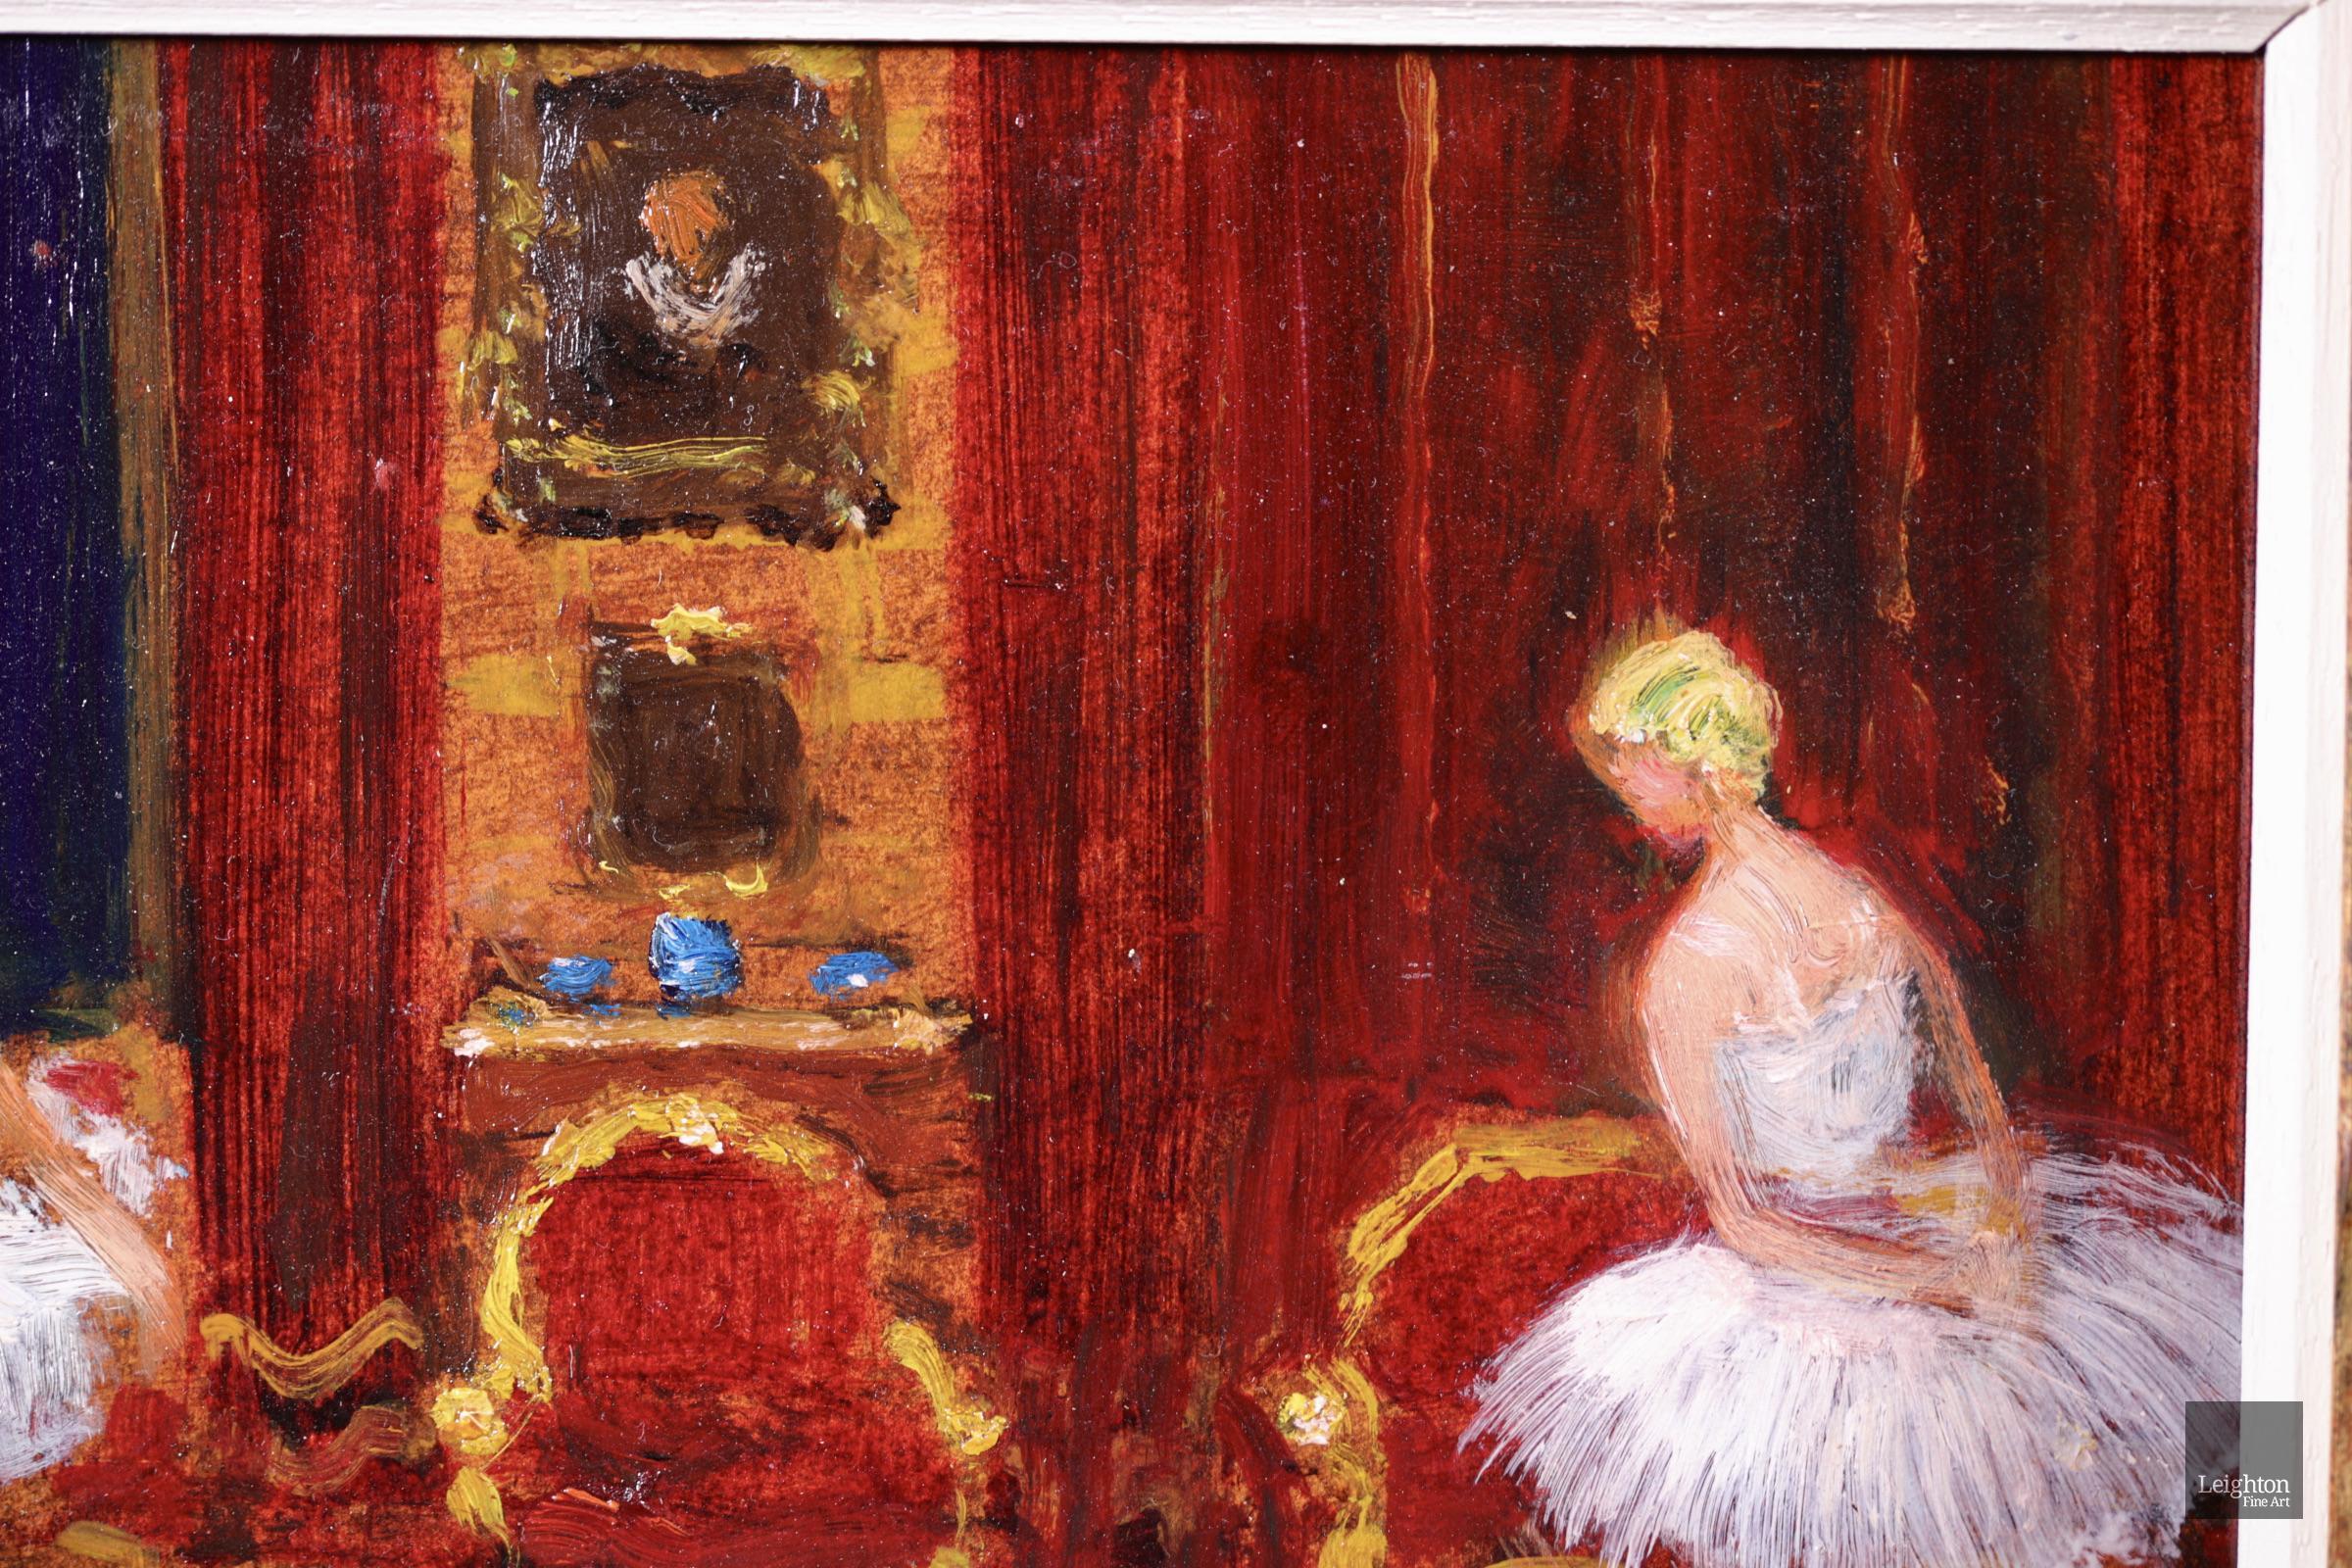 Signed impressionist figures in in interior oil on board circa 1940 by French painter Jules Rene Herve. The work depicts two blonde ballerinas - one seated one standing - dressed in white tutus in a grand room. There are three red gilded chairs